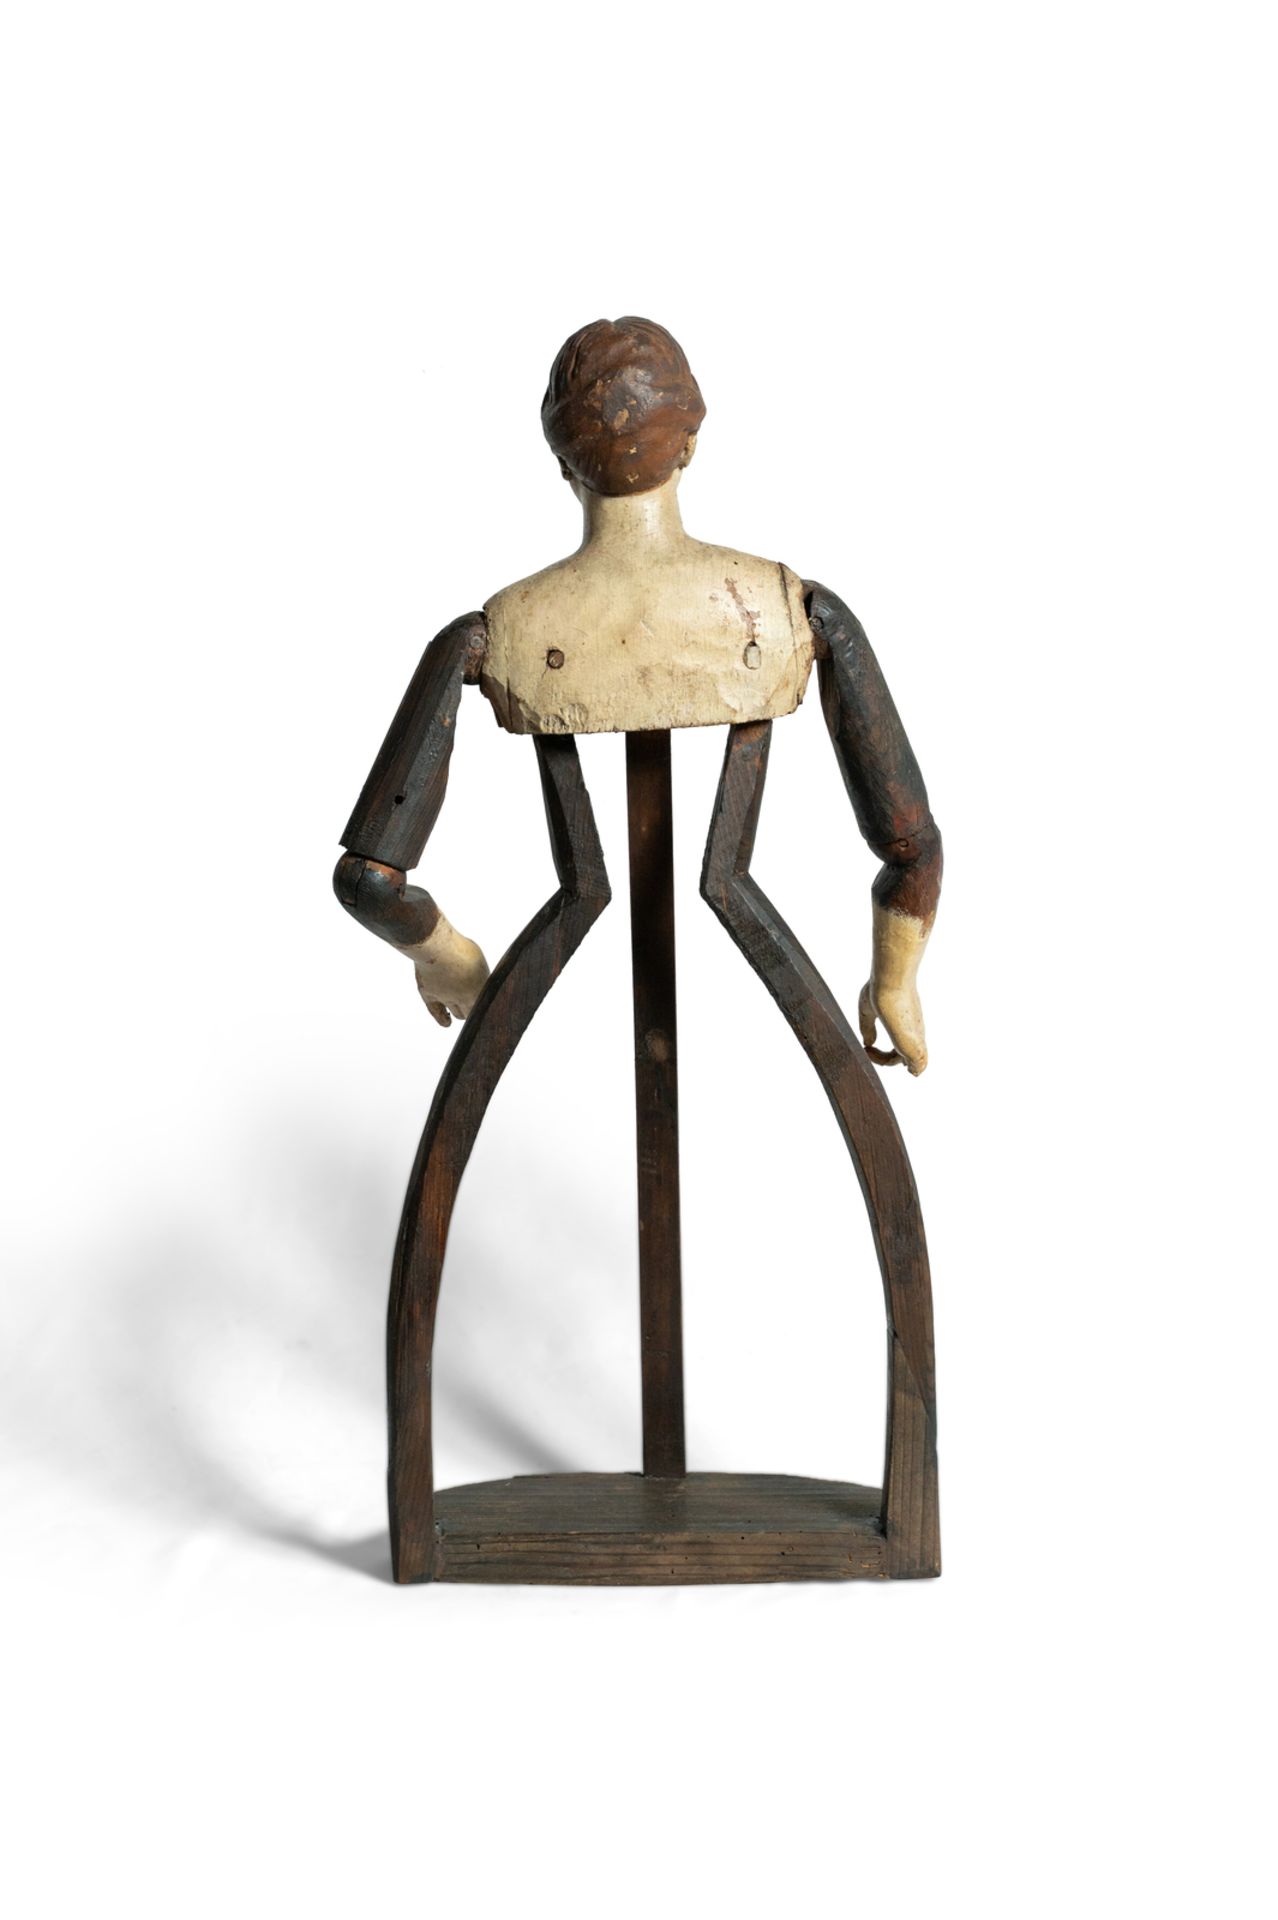 Wooden mannequin. Italy. Baroque, early 18th century. - Image 2 of 2